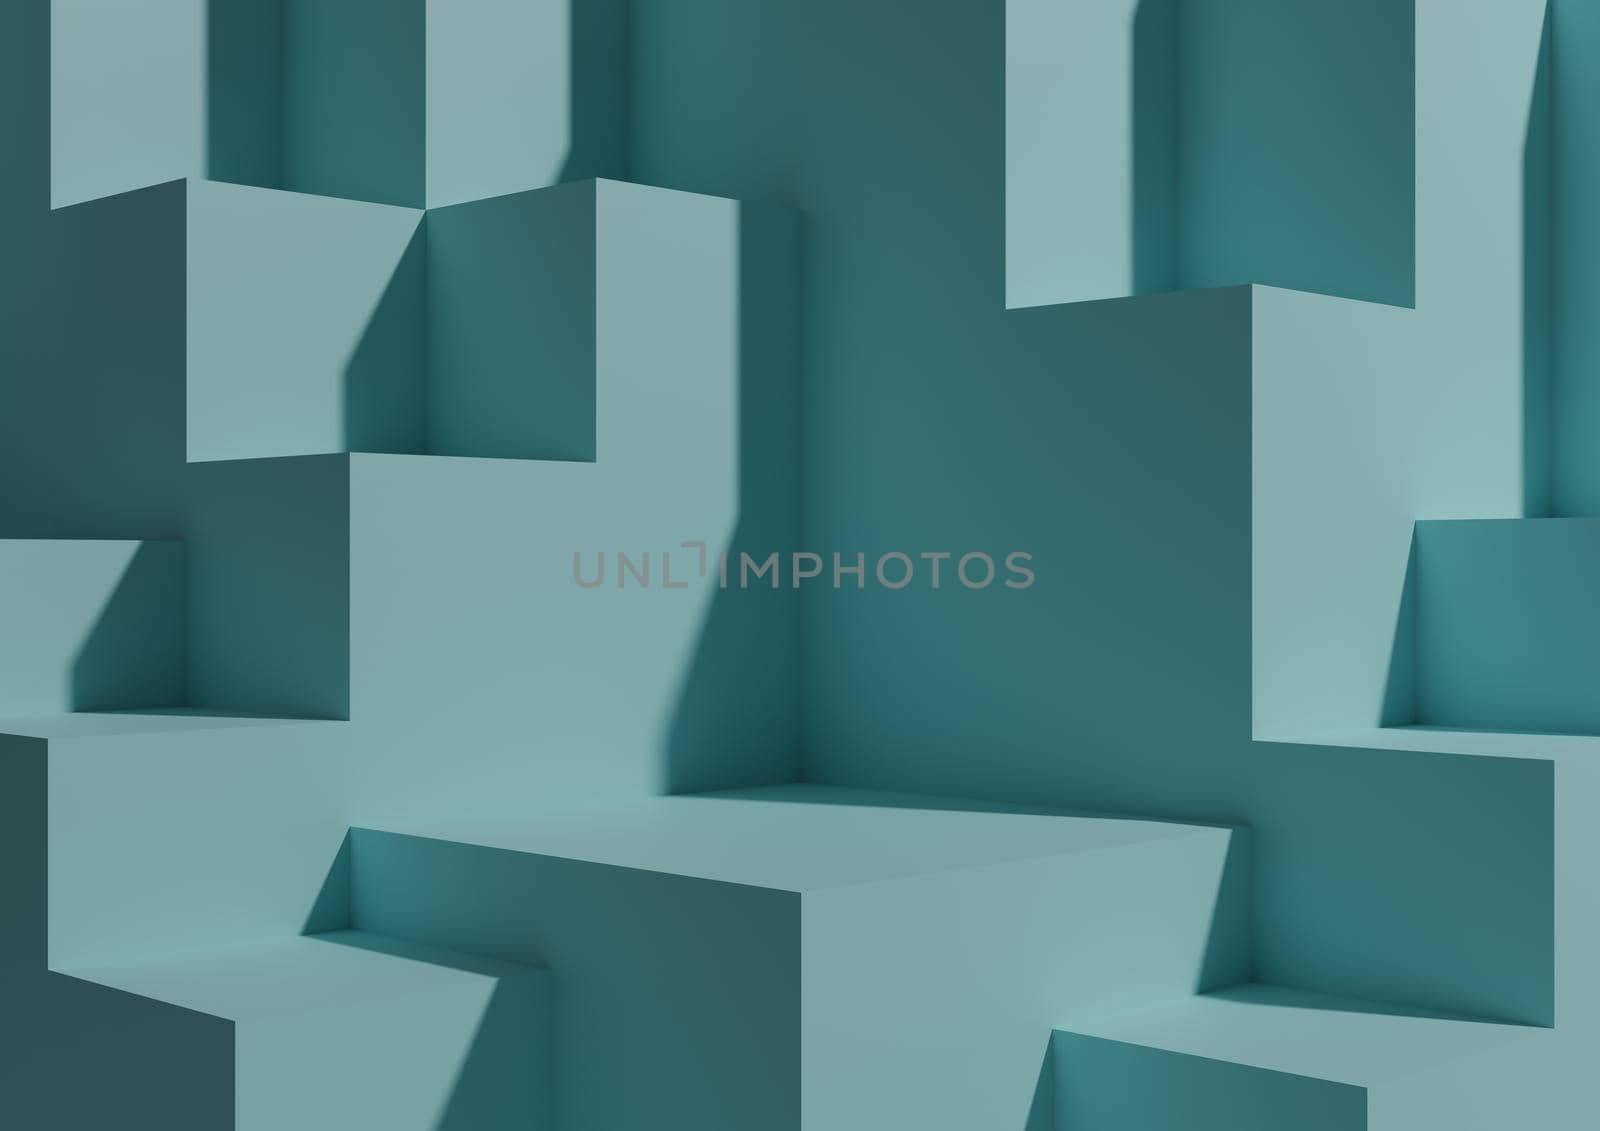 Minimal Light Pastel Blue Background 3D Studio Mockup Scene with Podiums and Levels for Product Display and Presentation. Geometric Horizontal Architectural Wallpaper.